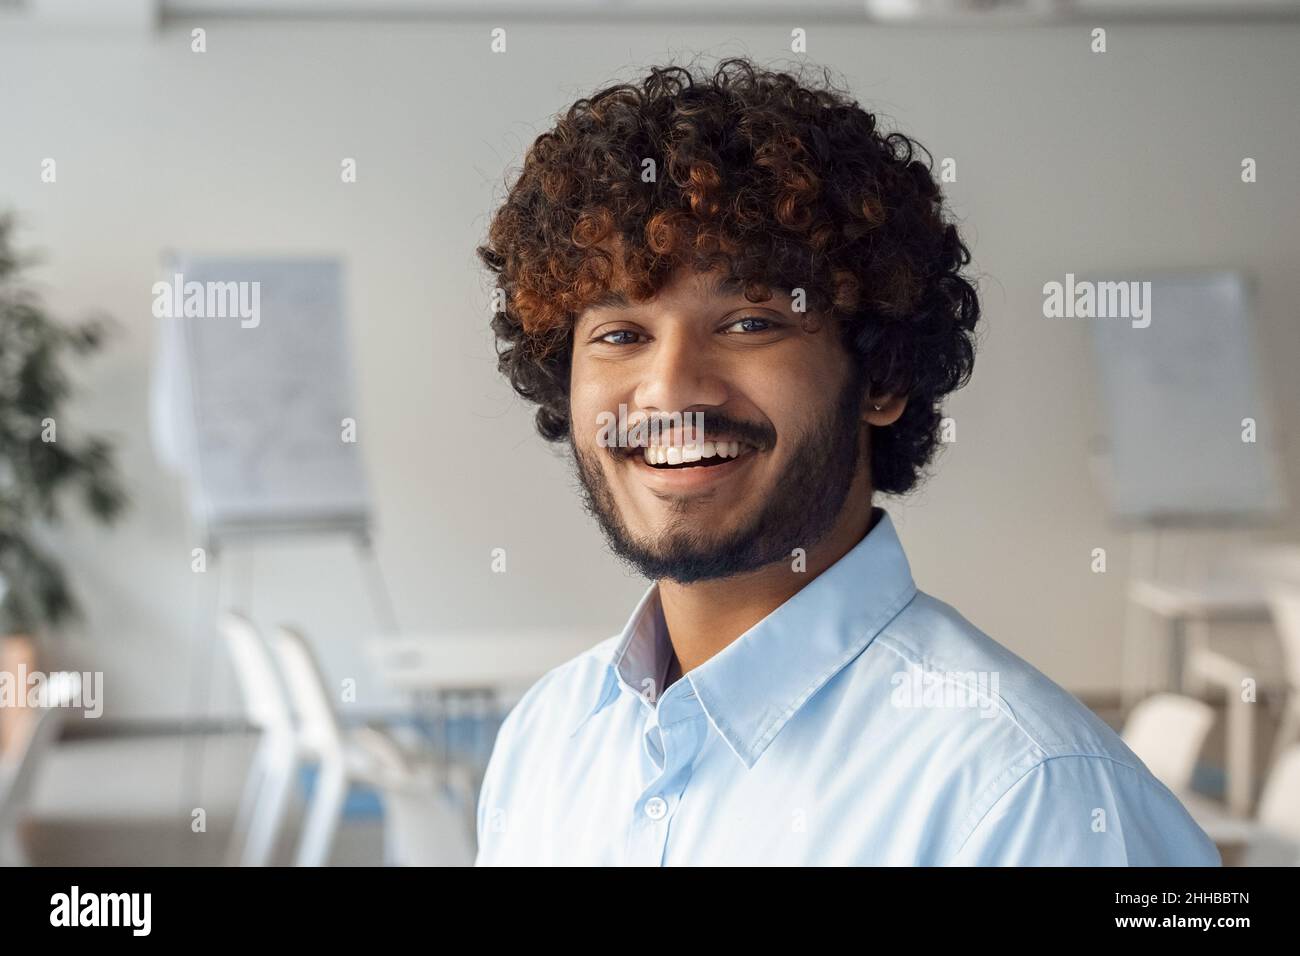 Portrait of happy indian business man with smile face looking at camera Stock Photo